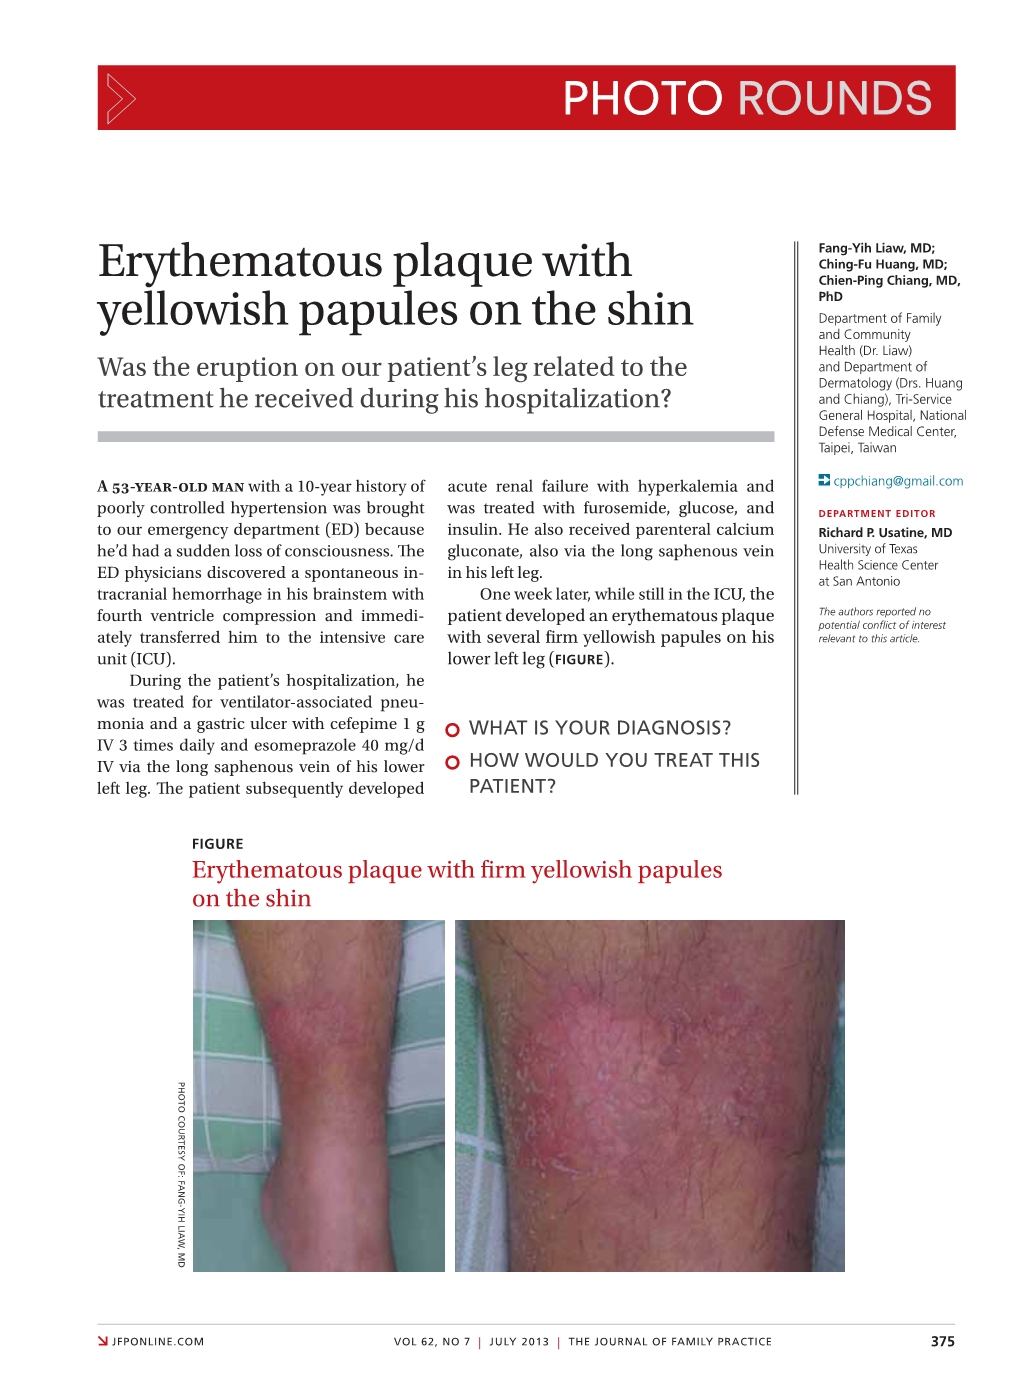 Erythematous Plaque with Yellowish Papules on the Shin